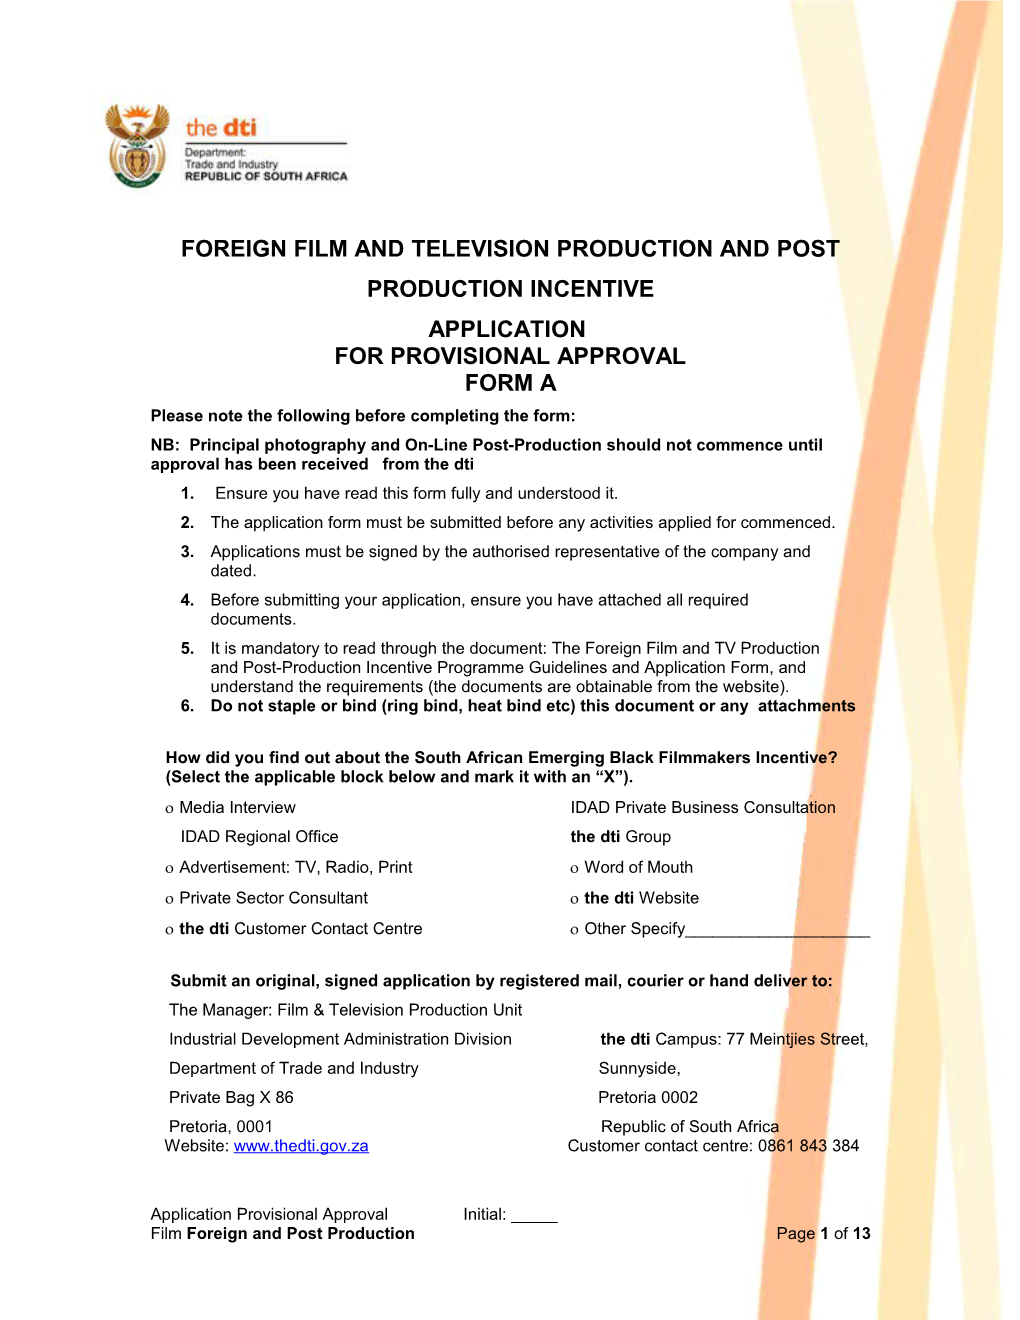 Foreign Film and Television Production and Post Production Incentive